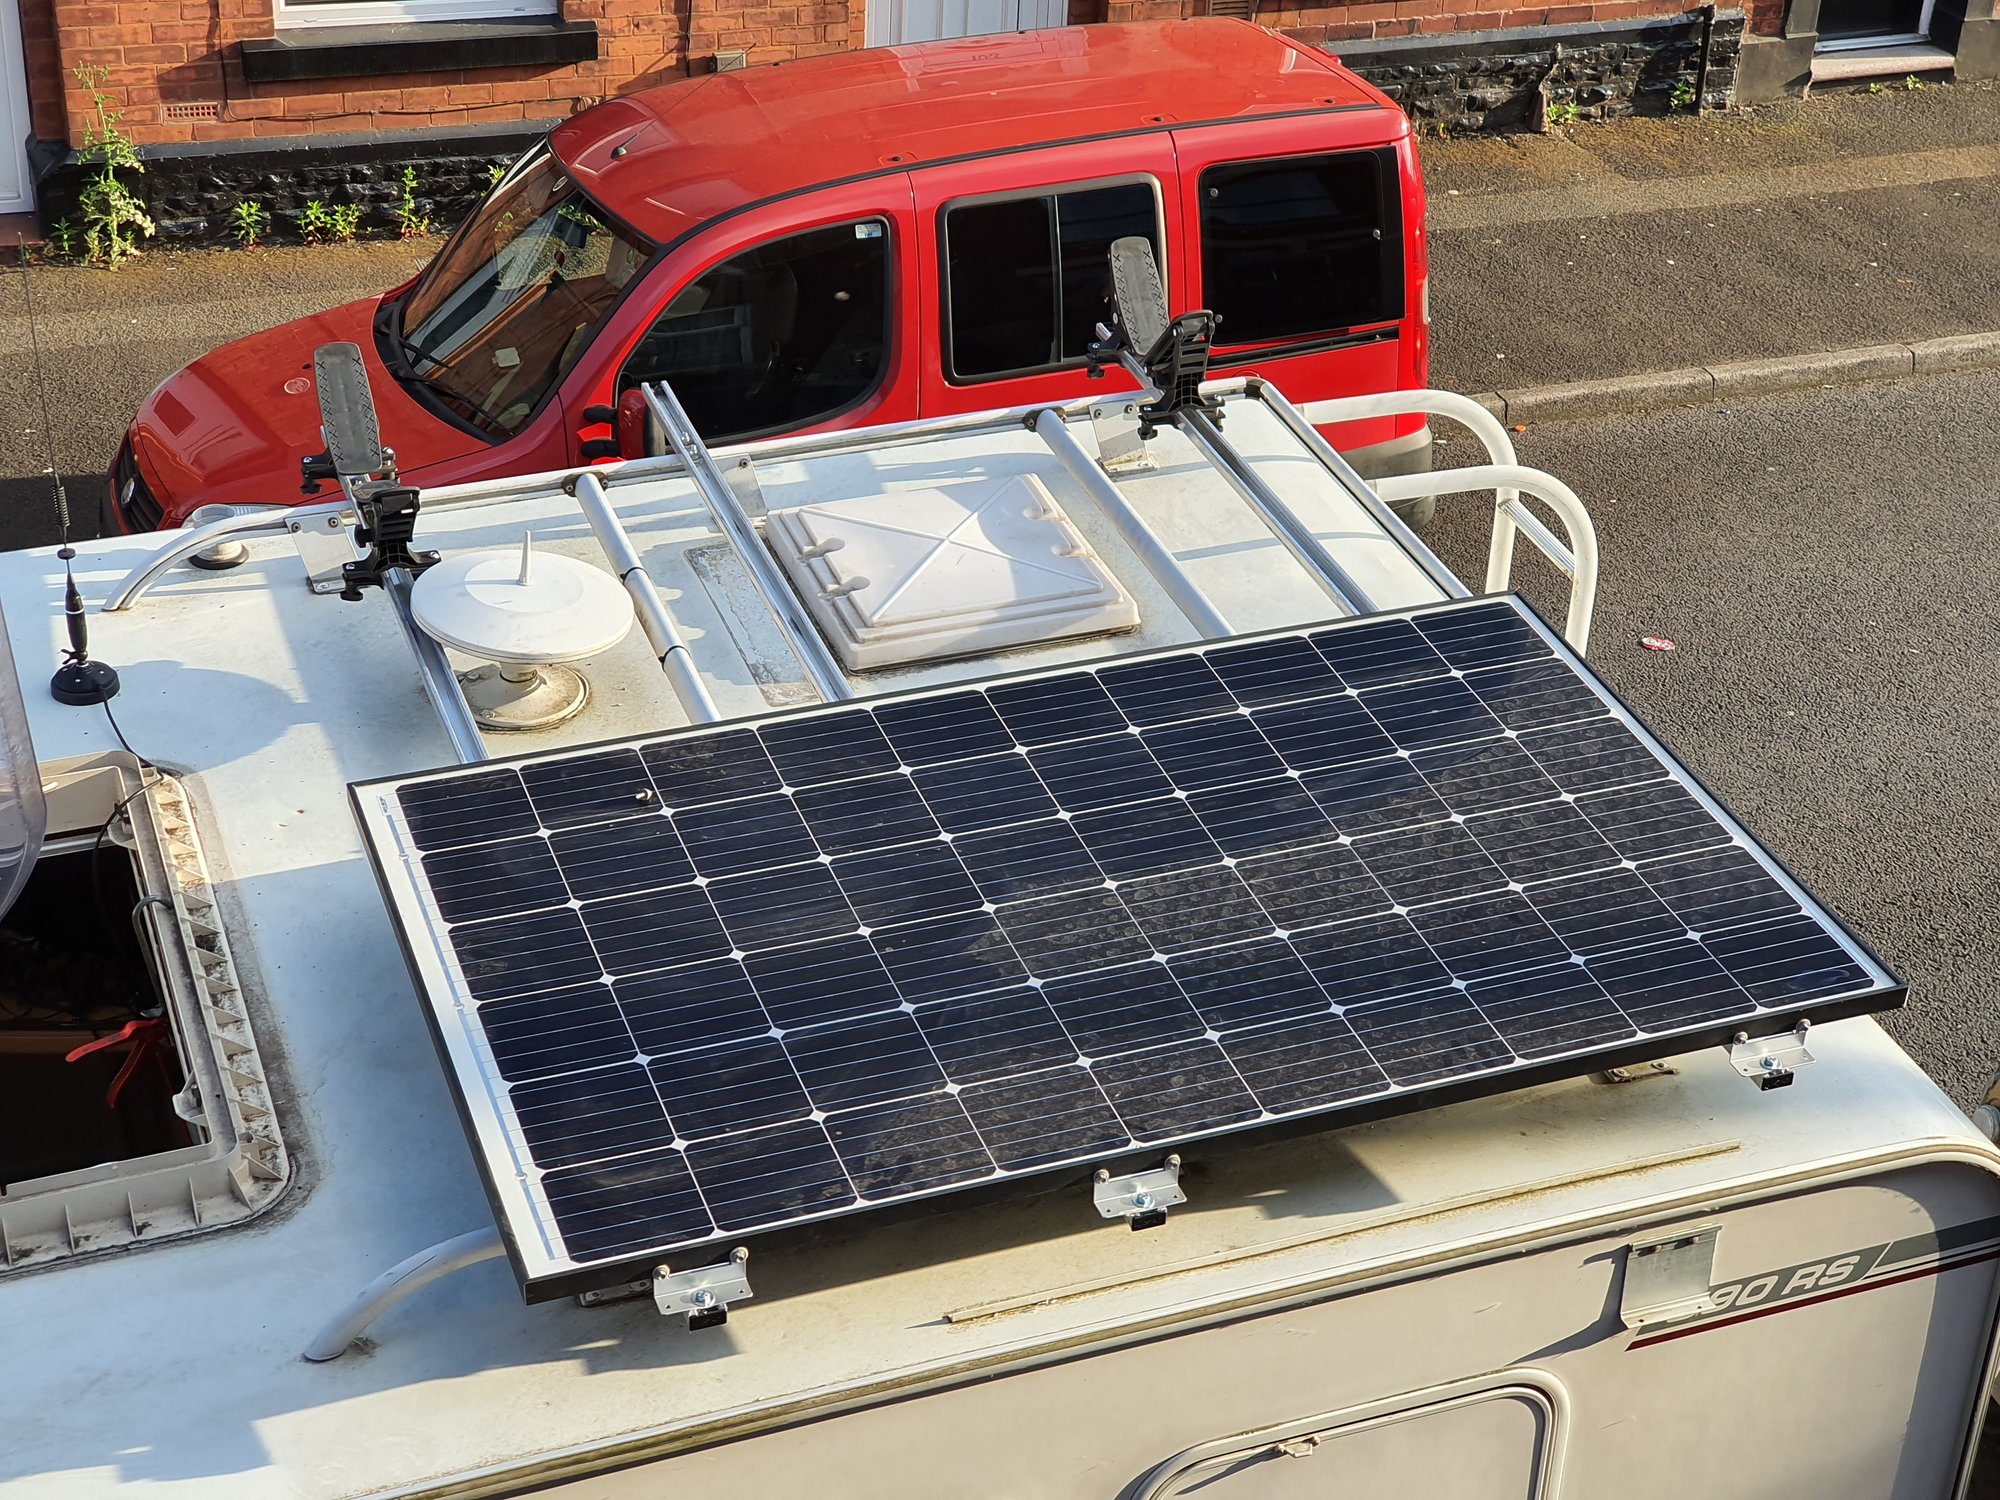 New 400w bifacial solar panel fitted | Wild Camping for Motorhomes